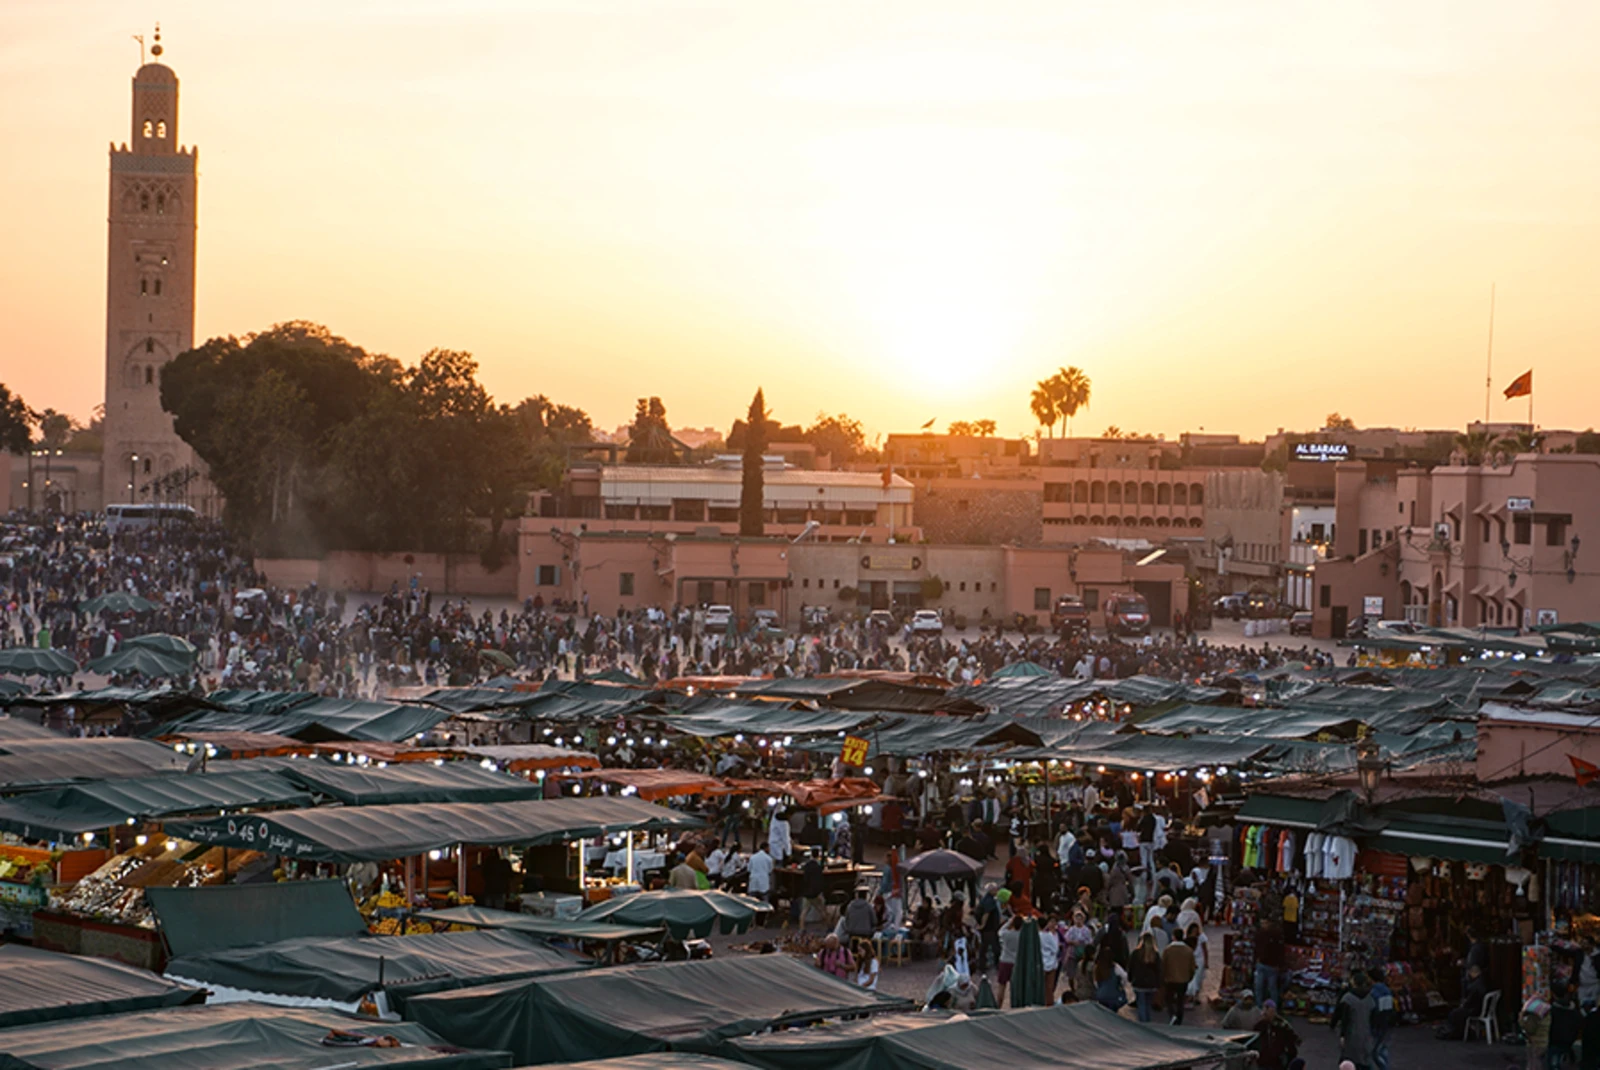 Morocco Marrakech night market sunset stands with green roofs 